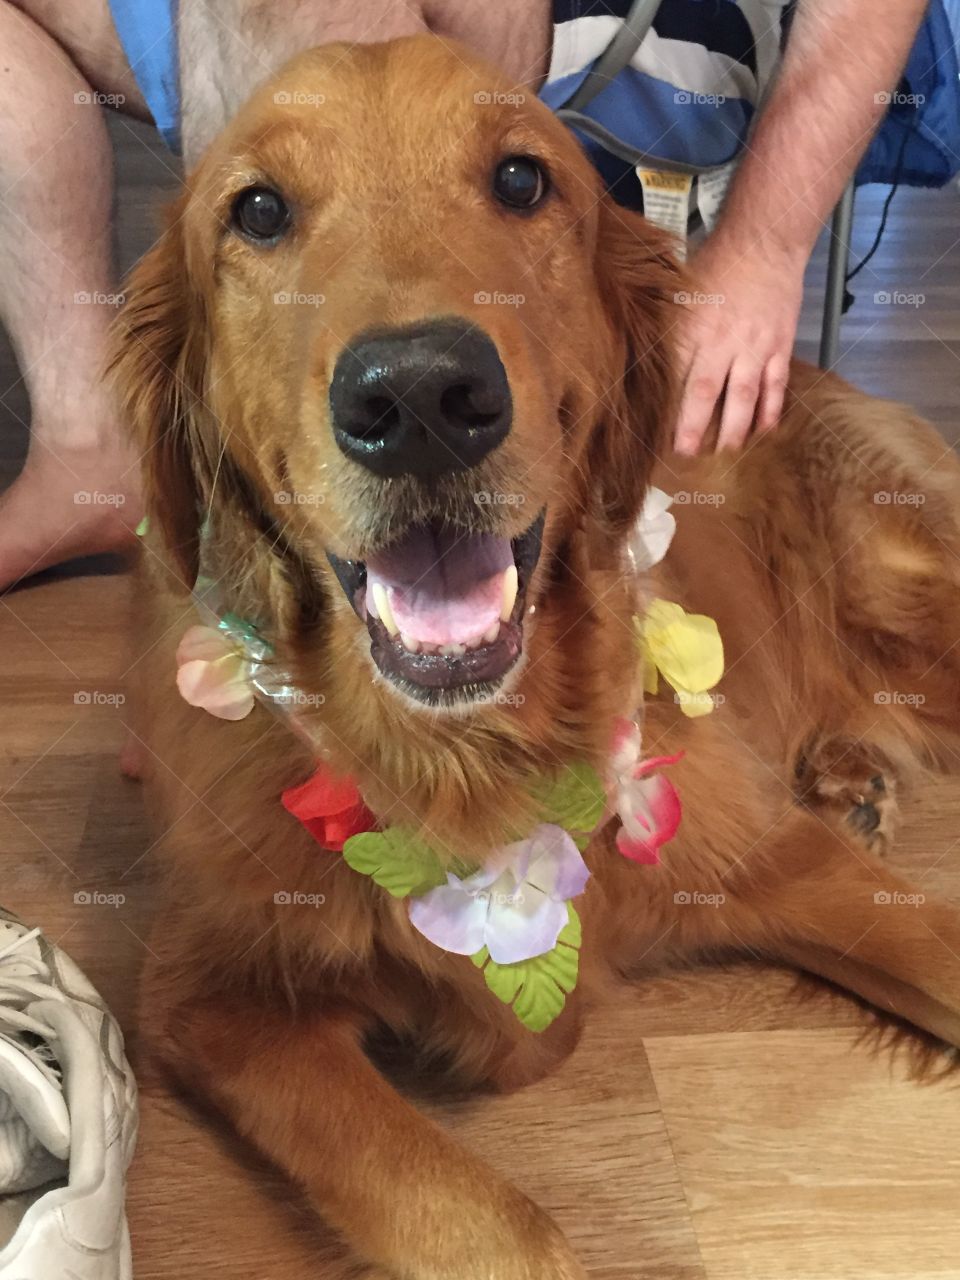 "I'm just a happy dog that moved with my humans to Hawai'i